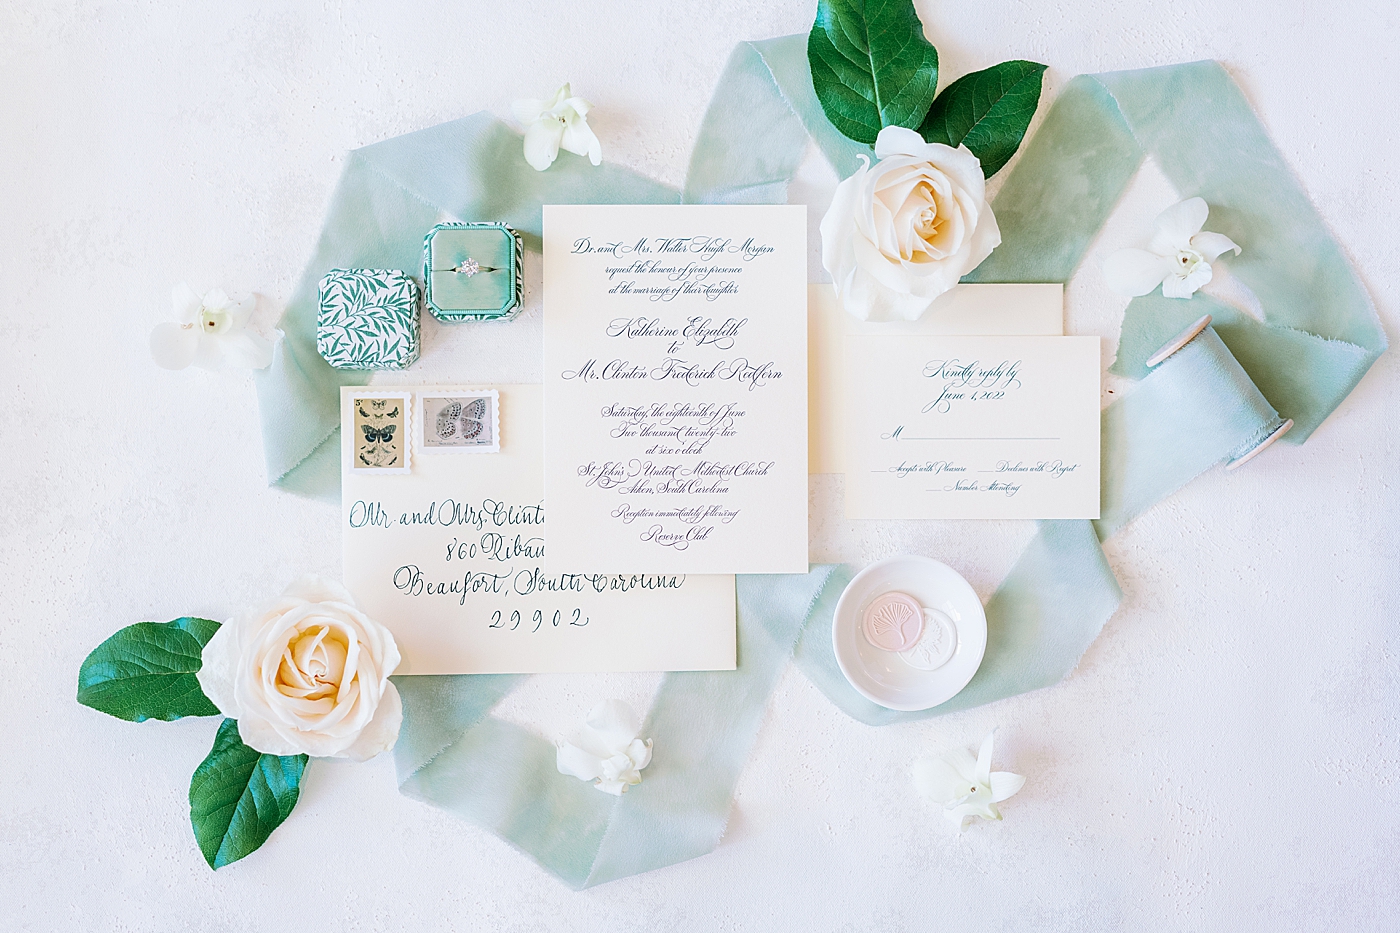 Bridal invitation styled with florals and blue ribbon | Image by Annie Laura Photo